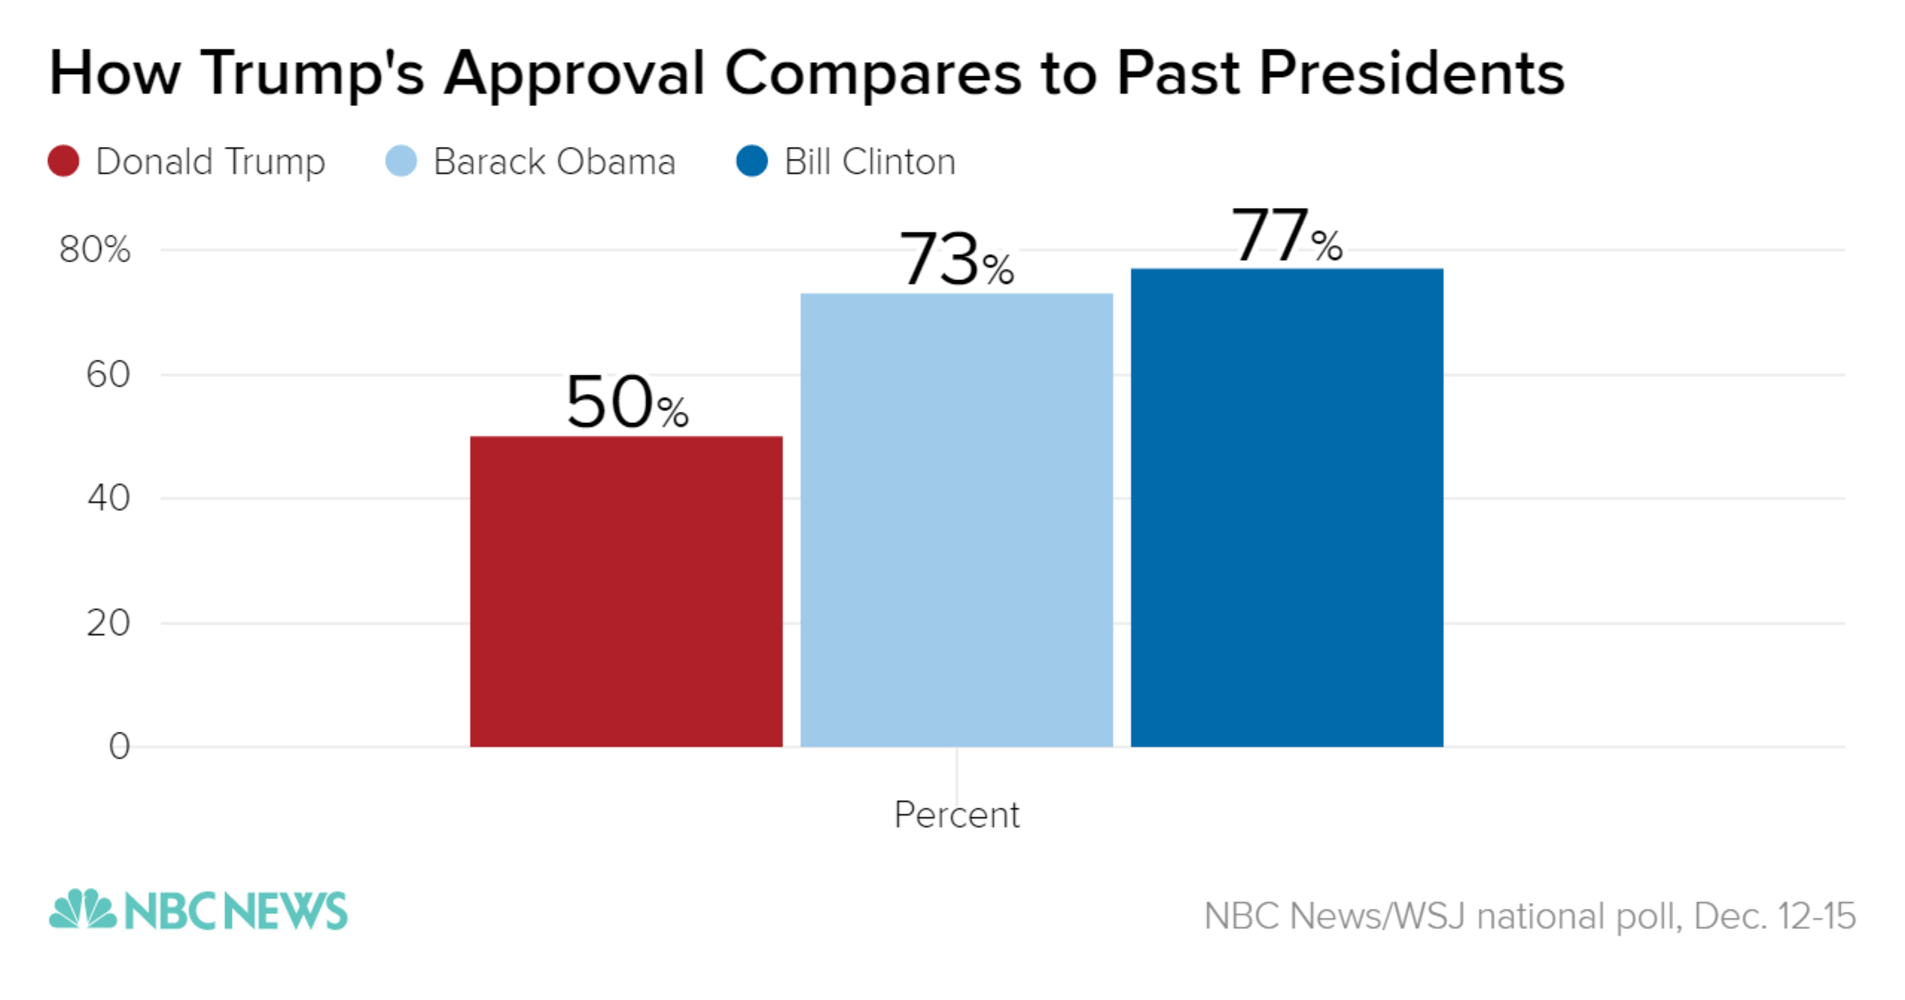 how_trumps_approval_compares_to_past_presidents_donald_trump_barack_obama_bill_clinton_chartbuilder_9137acb1847a87e22a350ce43f7307a8.nbcnews-ux-2880-1000.png